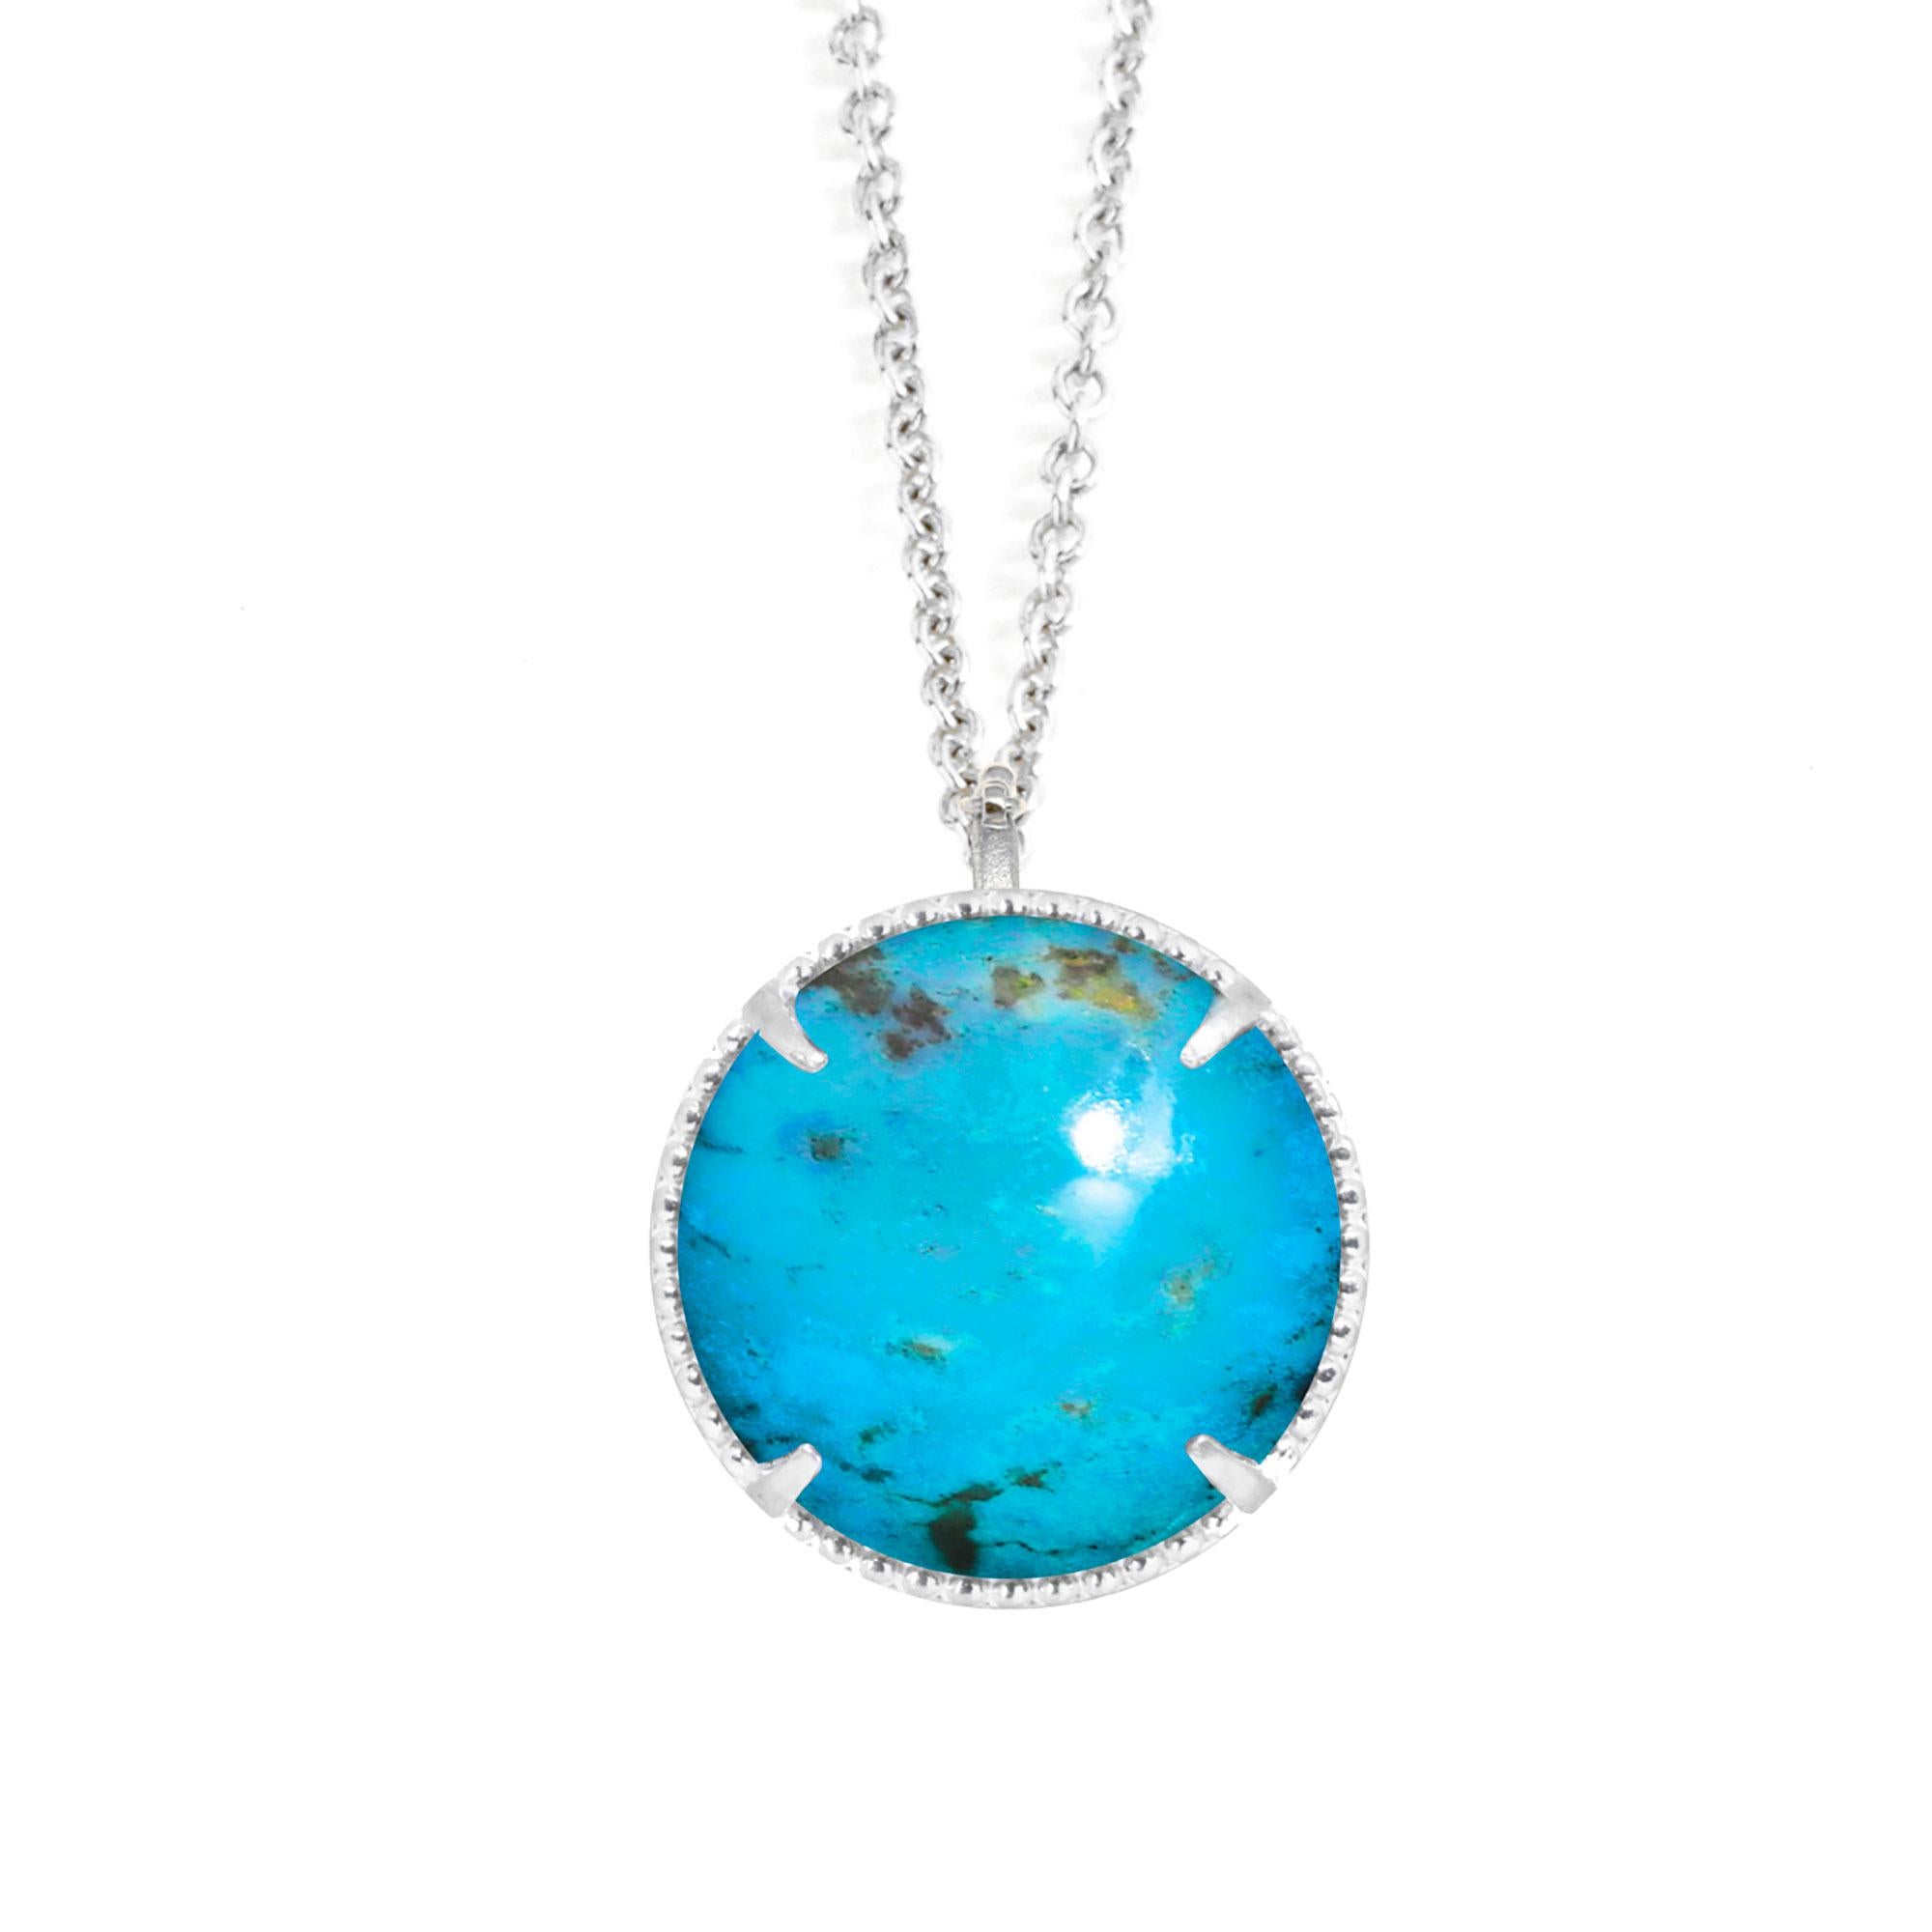 
Necklace Information
Metal: Sterling Silver
Length: 15-17''

Gemstone Information
Stone Size: 10mm
Total Carat Weight: 4
About the stones:
Genuine Turquoise: Turquoise is an opaque blue-to-green mineral, technically a hydrated phosphate of copper